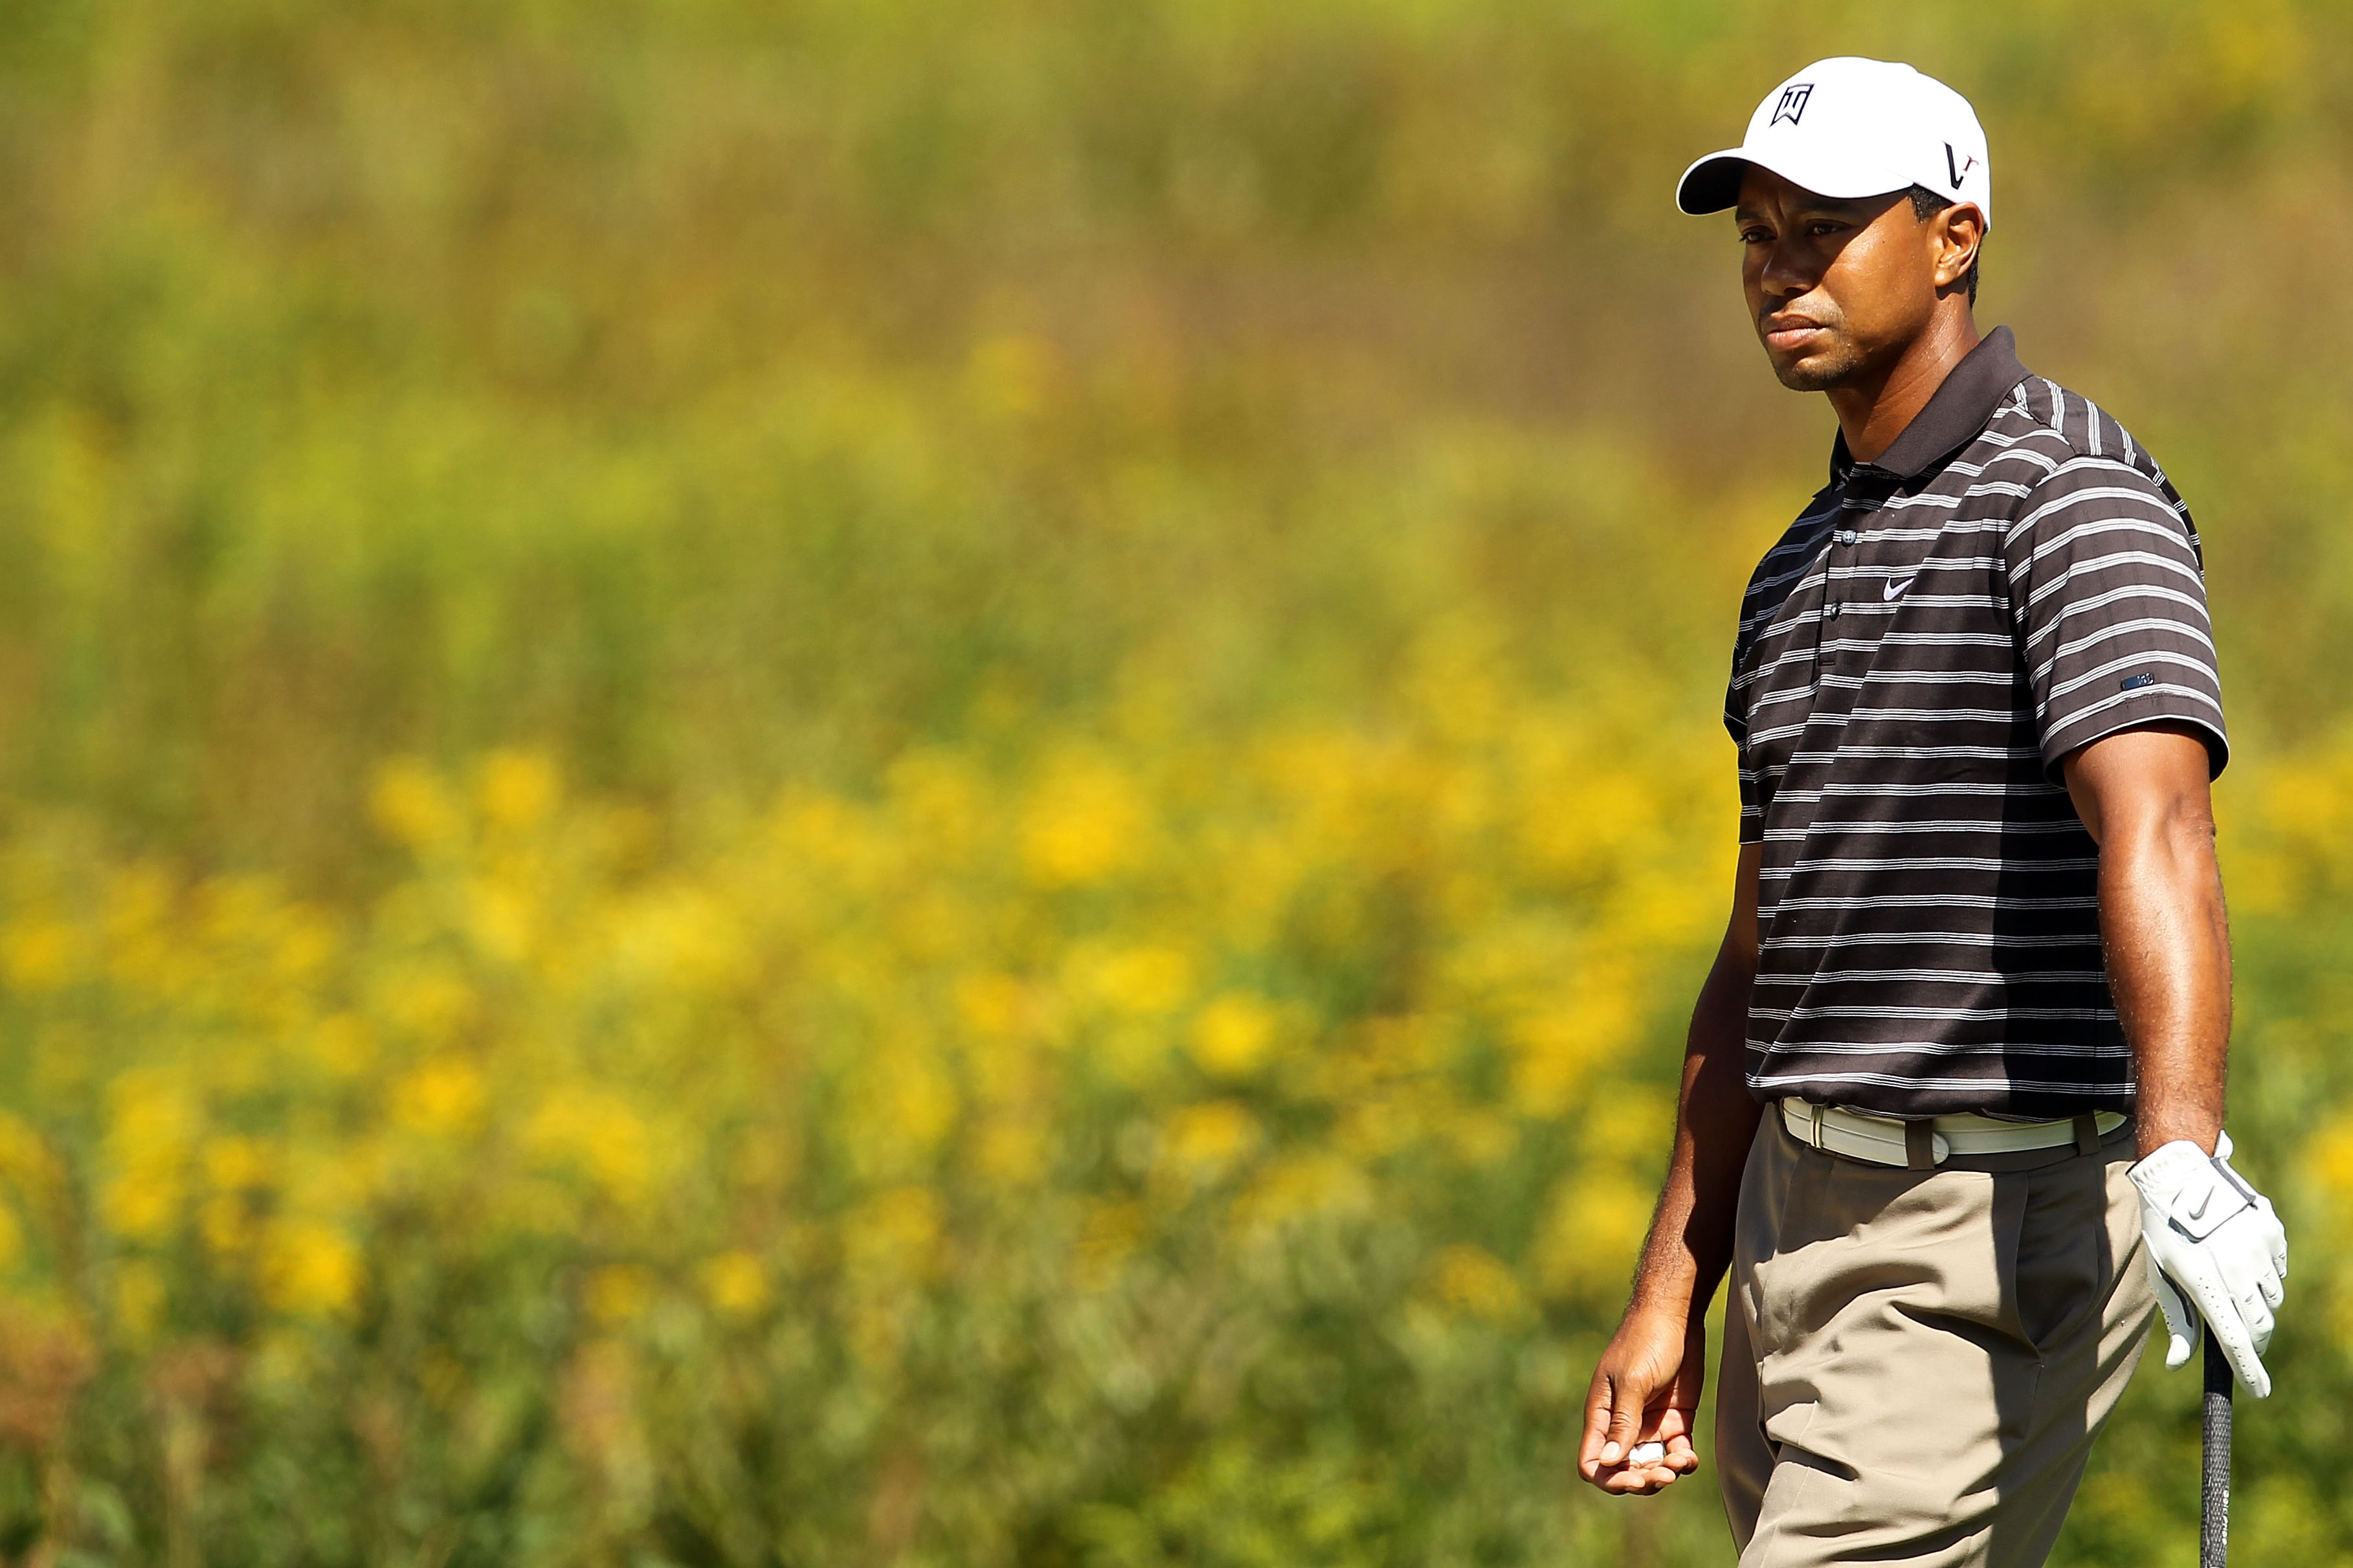 NORTON, MA - SEPTEMBER 05:  Tiger Woods looks on from the third hole during the third round of the Deutsche Bank Championship at TPC Boston on September 5, 2010 in Norton, Massachusetts.  (Photo by Mike Ehrmann/Getty Images)